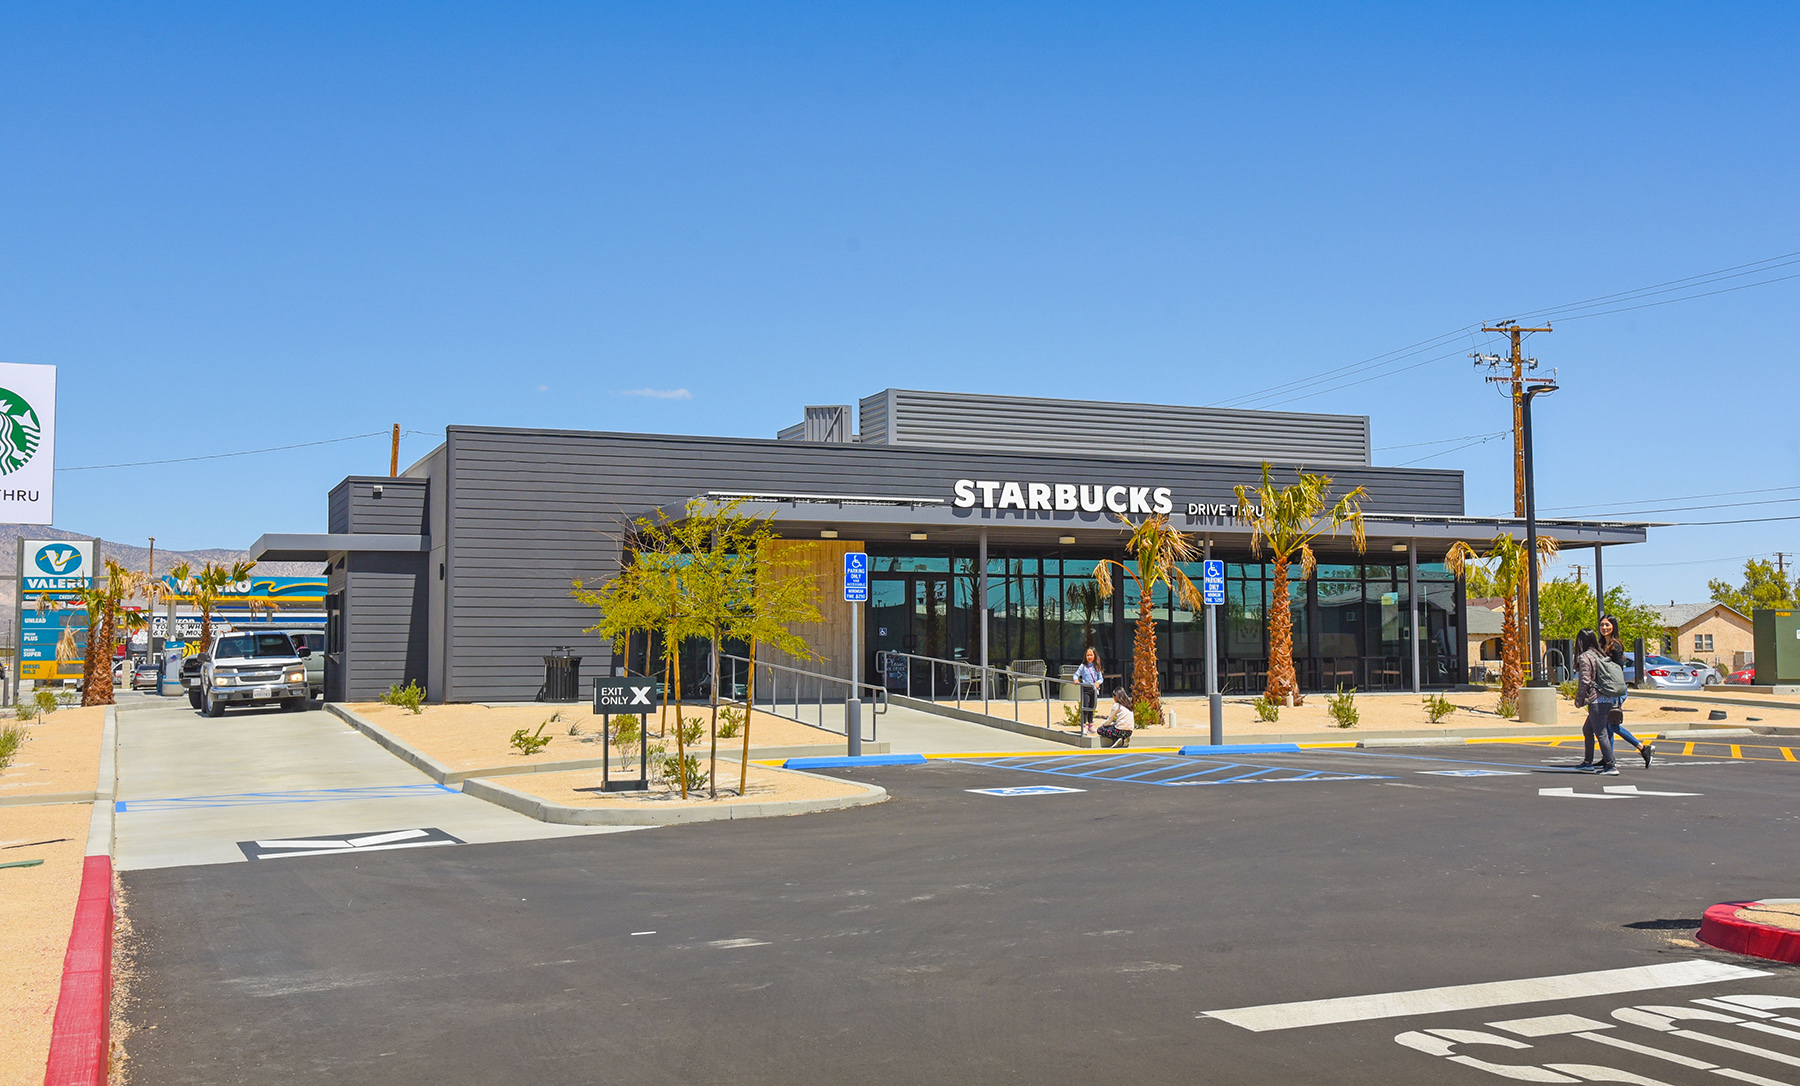 Hanley Investment Group Arranges Sale of New Construction Starbucks Drive-Thru in Mojave, Calif. for $4.56 Million